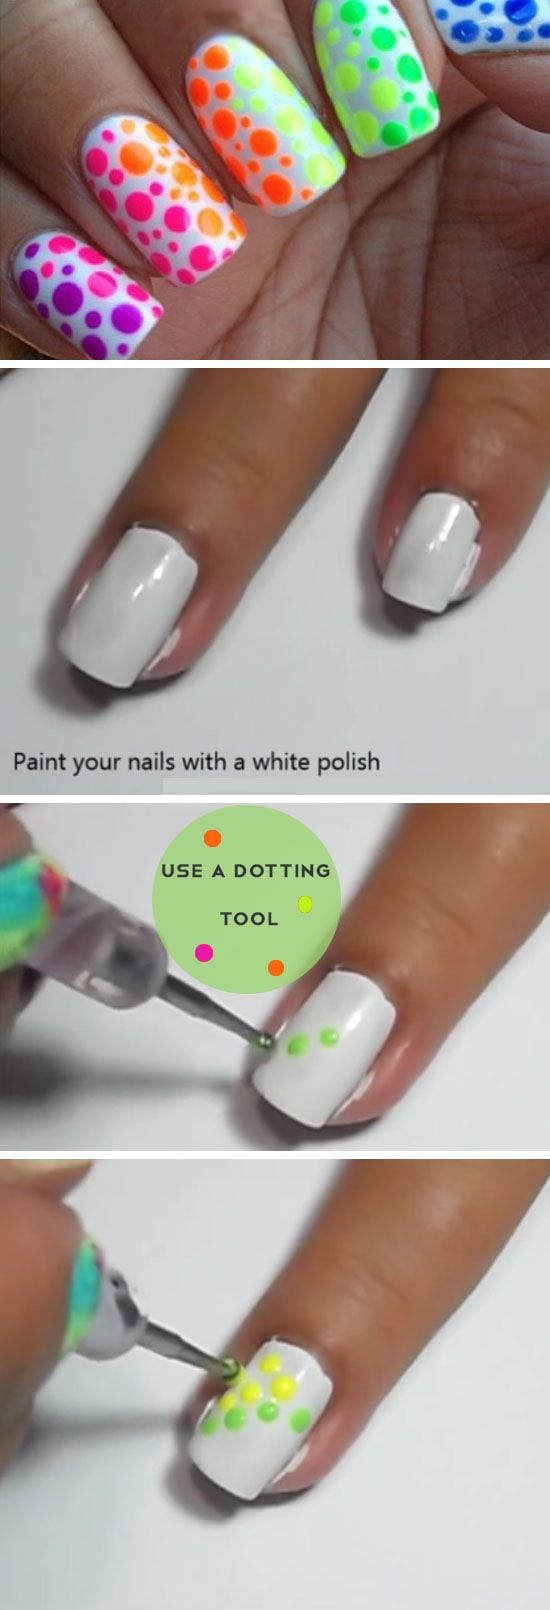 [ad_1]

Neon Polkadots | DIY Back to School Nails for Kids | Awesome Nail Art Ideas for Fall
Source by lyn68da
[ad_2]
			
			…